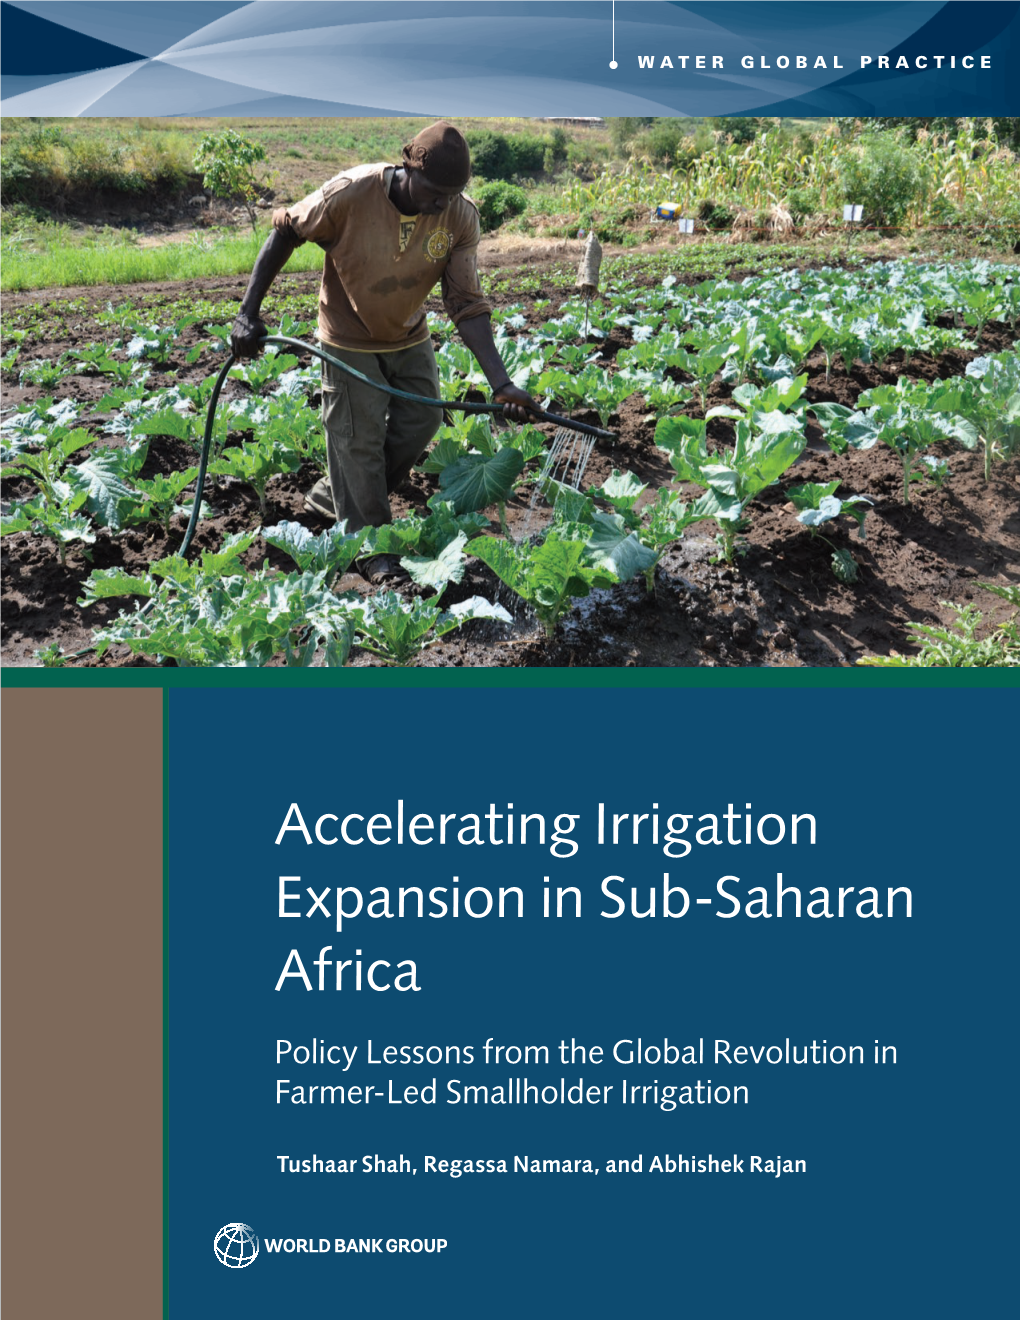 Accelerating Irrigation Expansion in Sub-Saharan Africa Policy Lessons from the Global Revolution in Farmer-Led Smallholder Irrigation